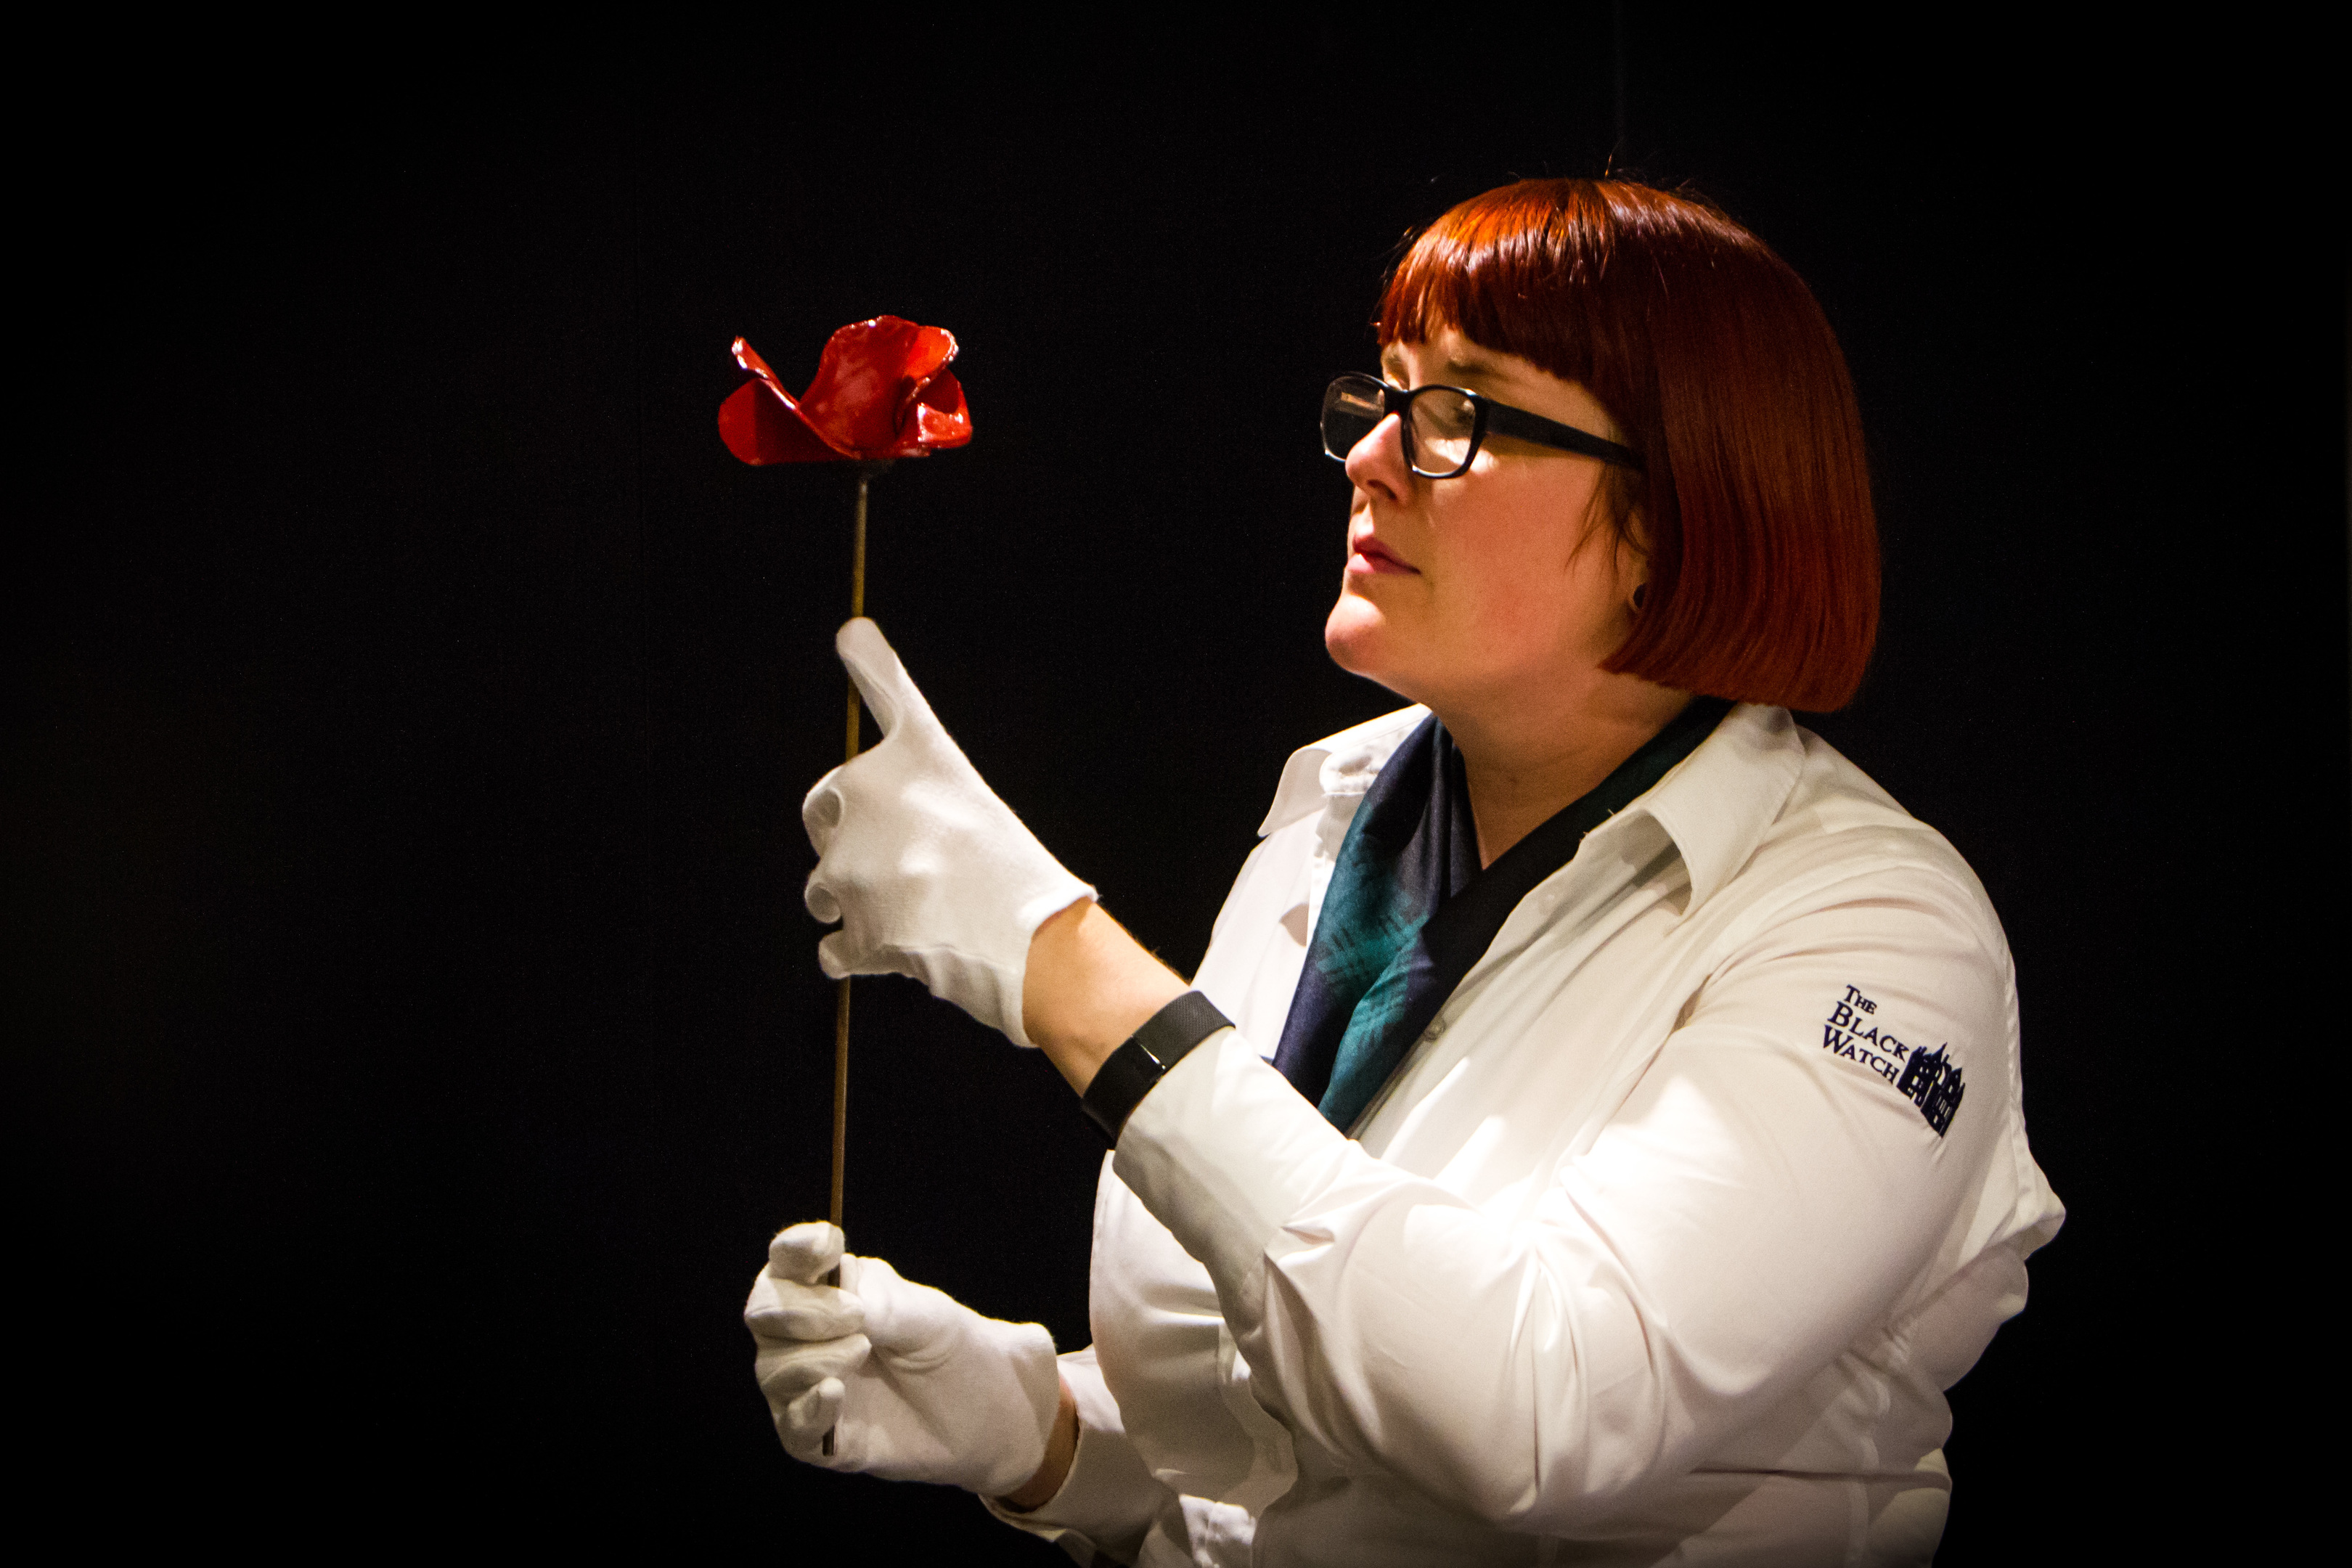 Black Watch museum manager Emma Halford-Forbes, with one of the ceramic poppies. This particular poppy has been gifted to the museum and will go on permanent display at the castle.